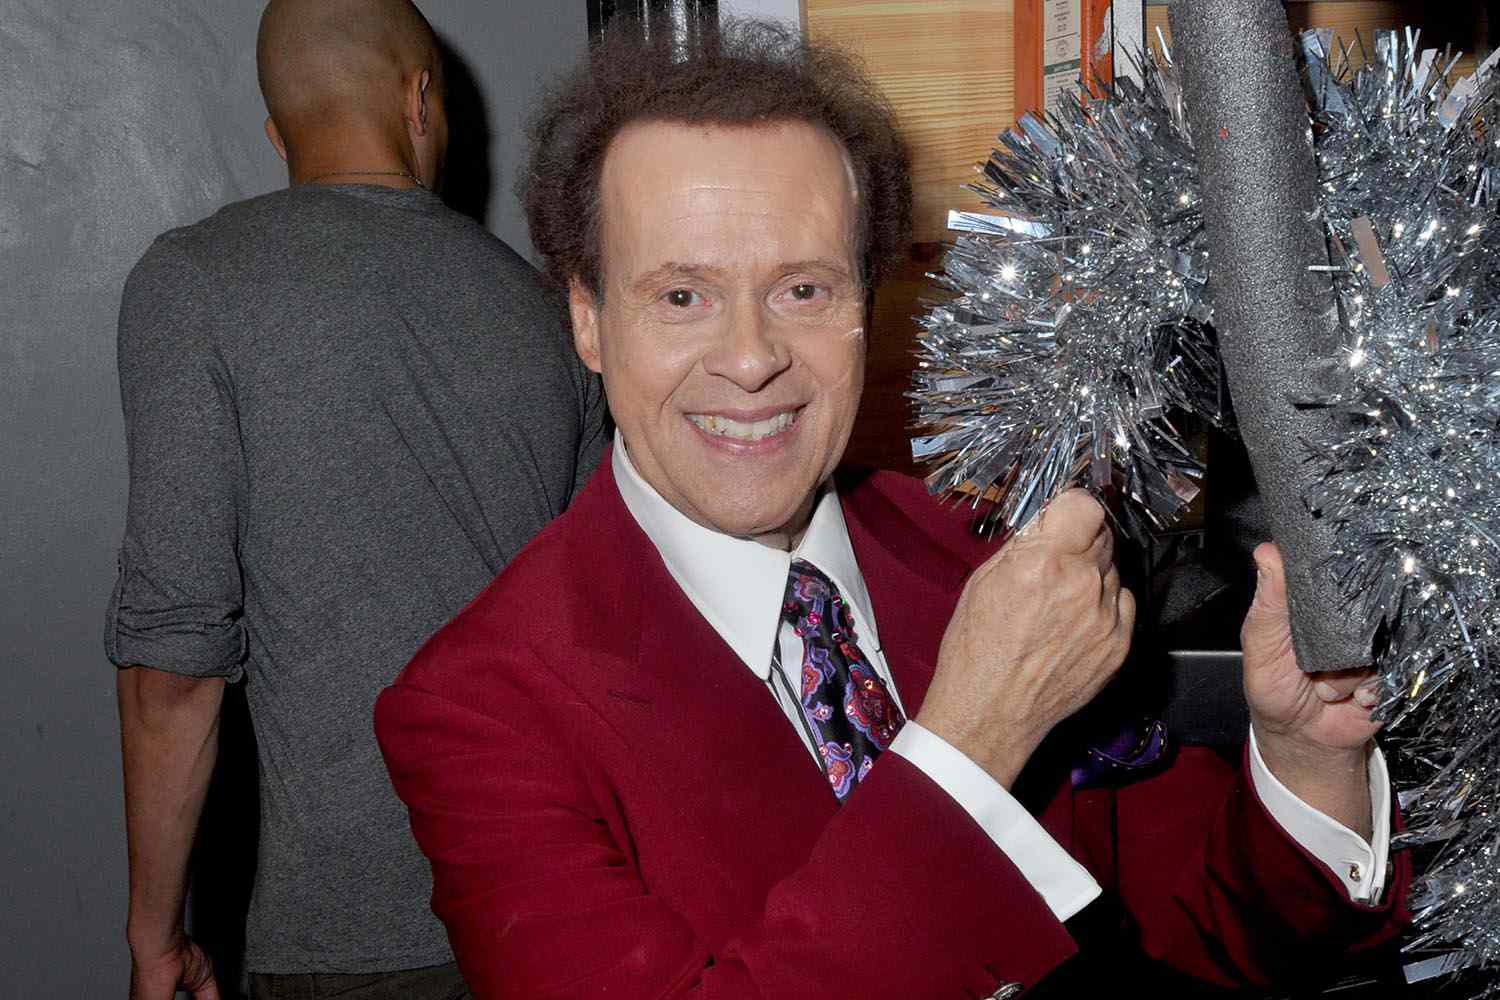 Richard Simmons Shared Message About Enjoying Life Months Before His Death: 'Count Your Blessings'